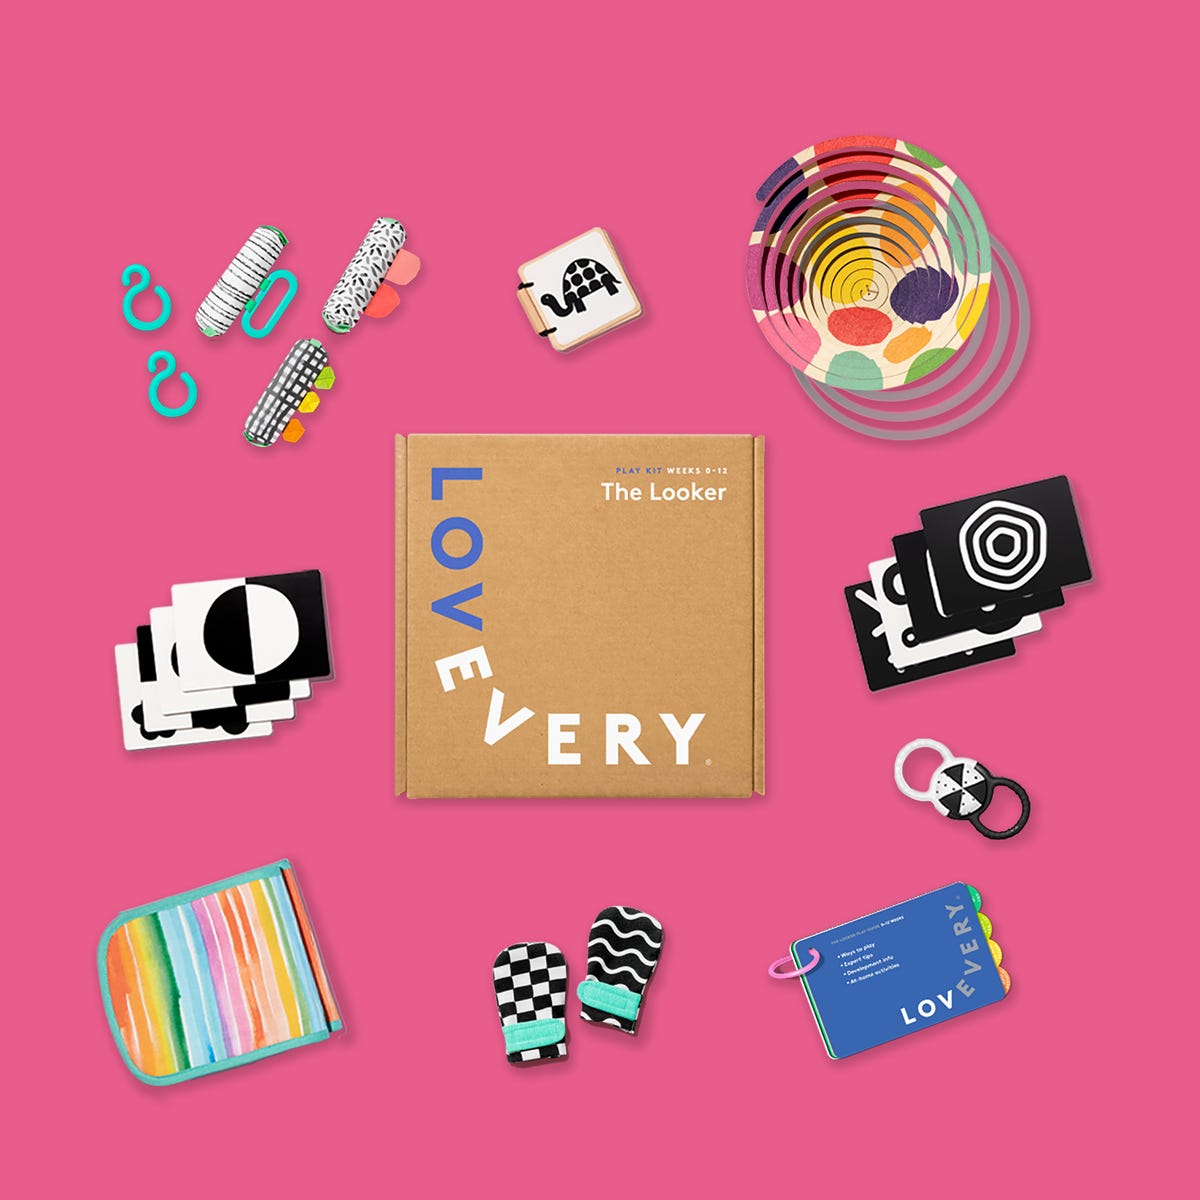 Lovevery Play Kits Reviewed: Are These Subscription Boxes Worth